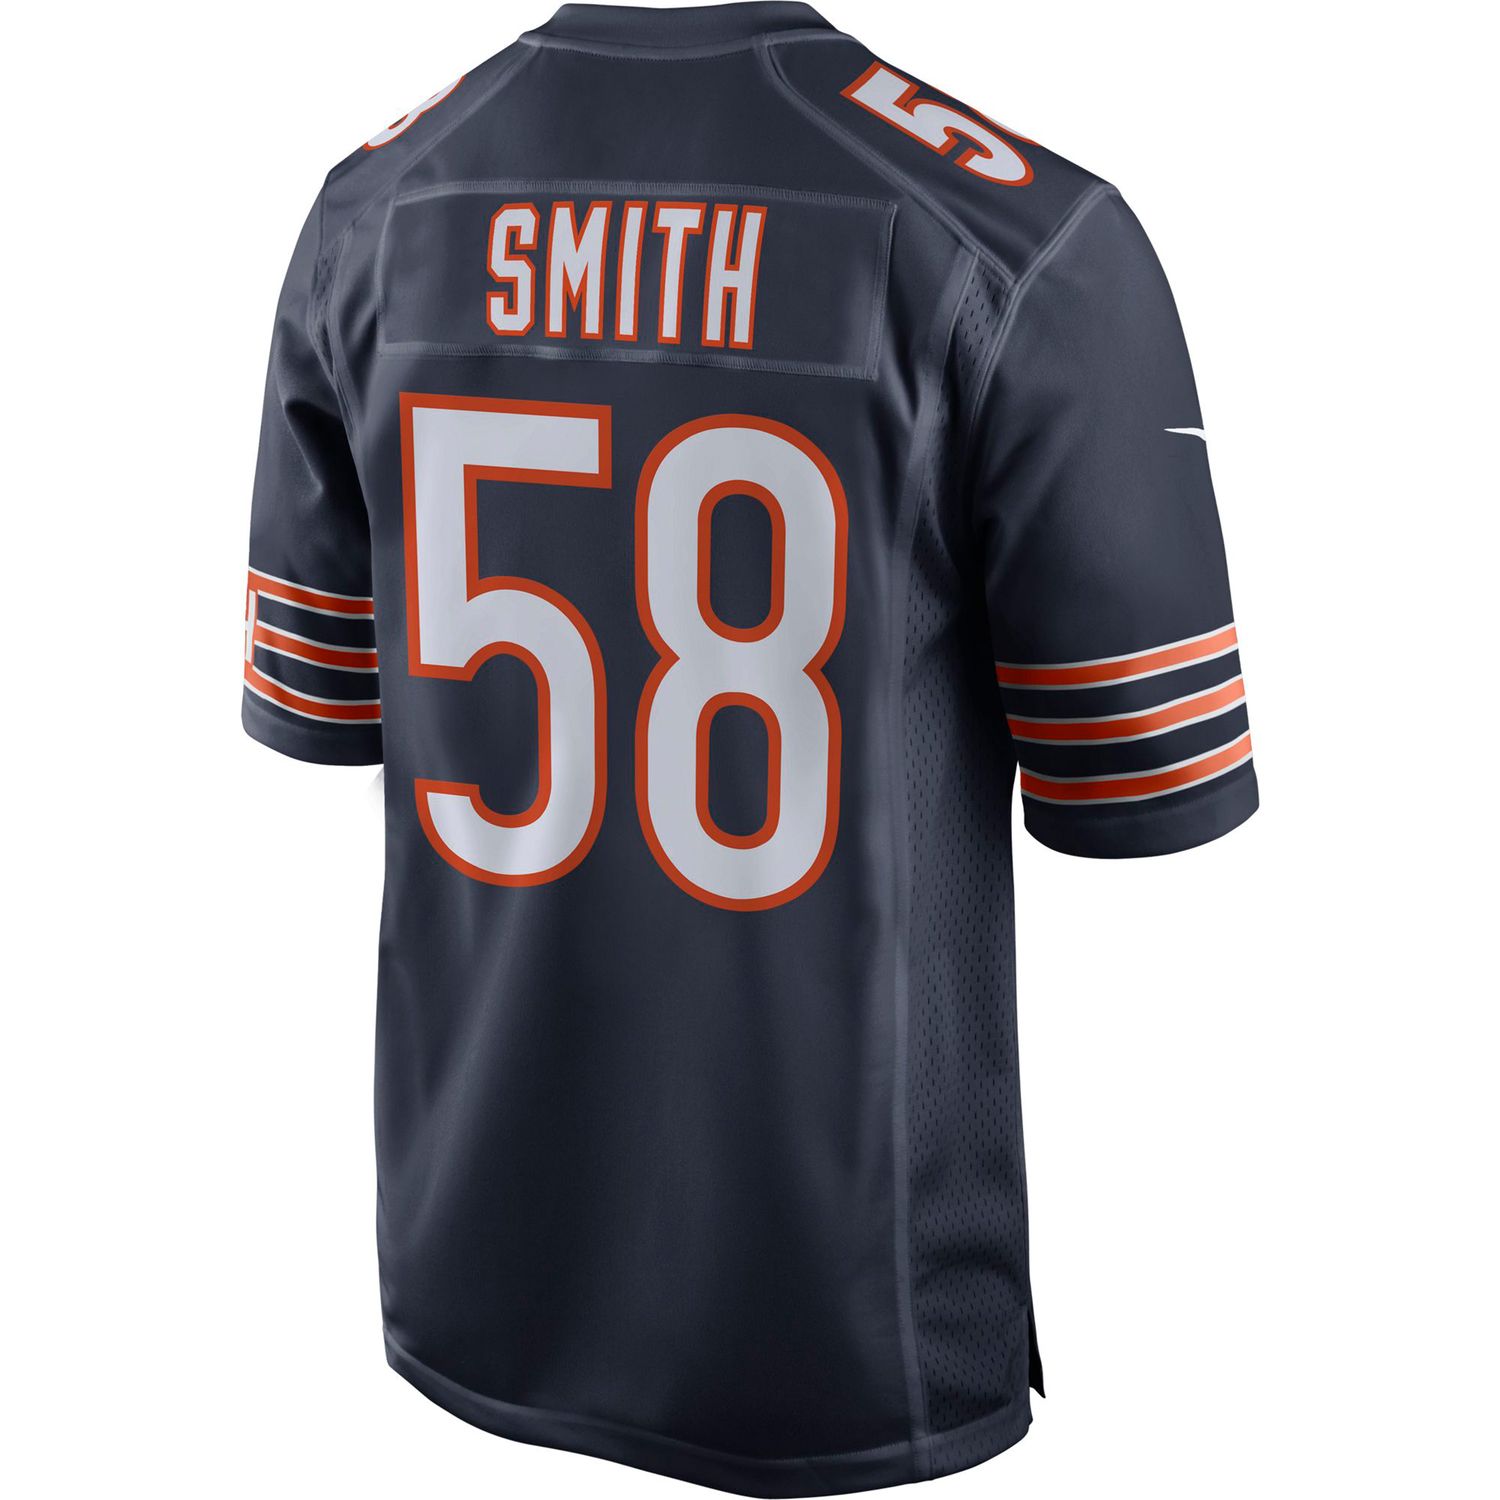 roquan smith white jersey